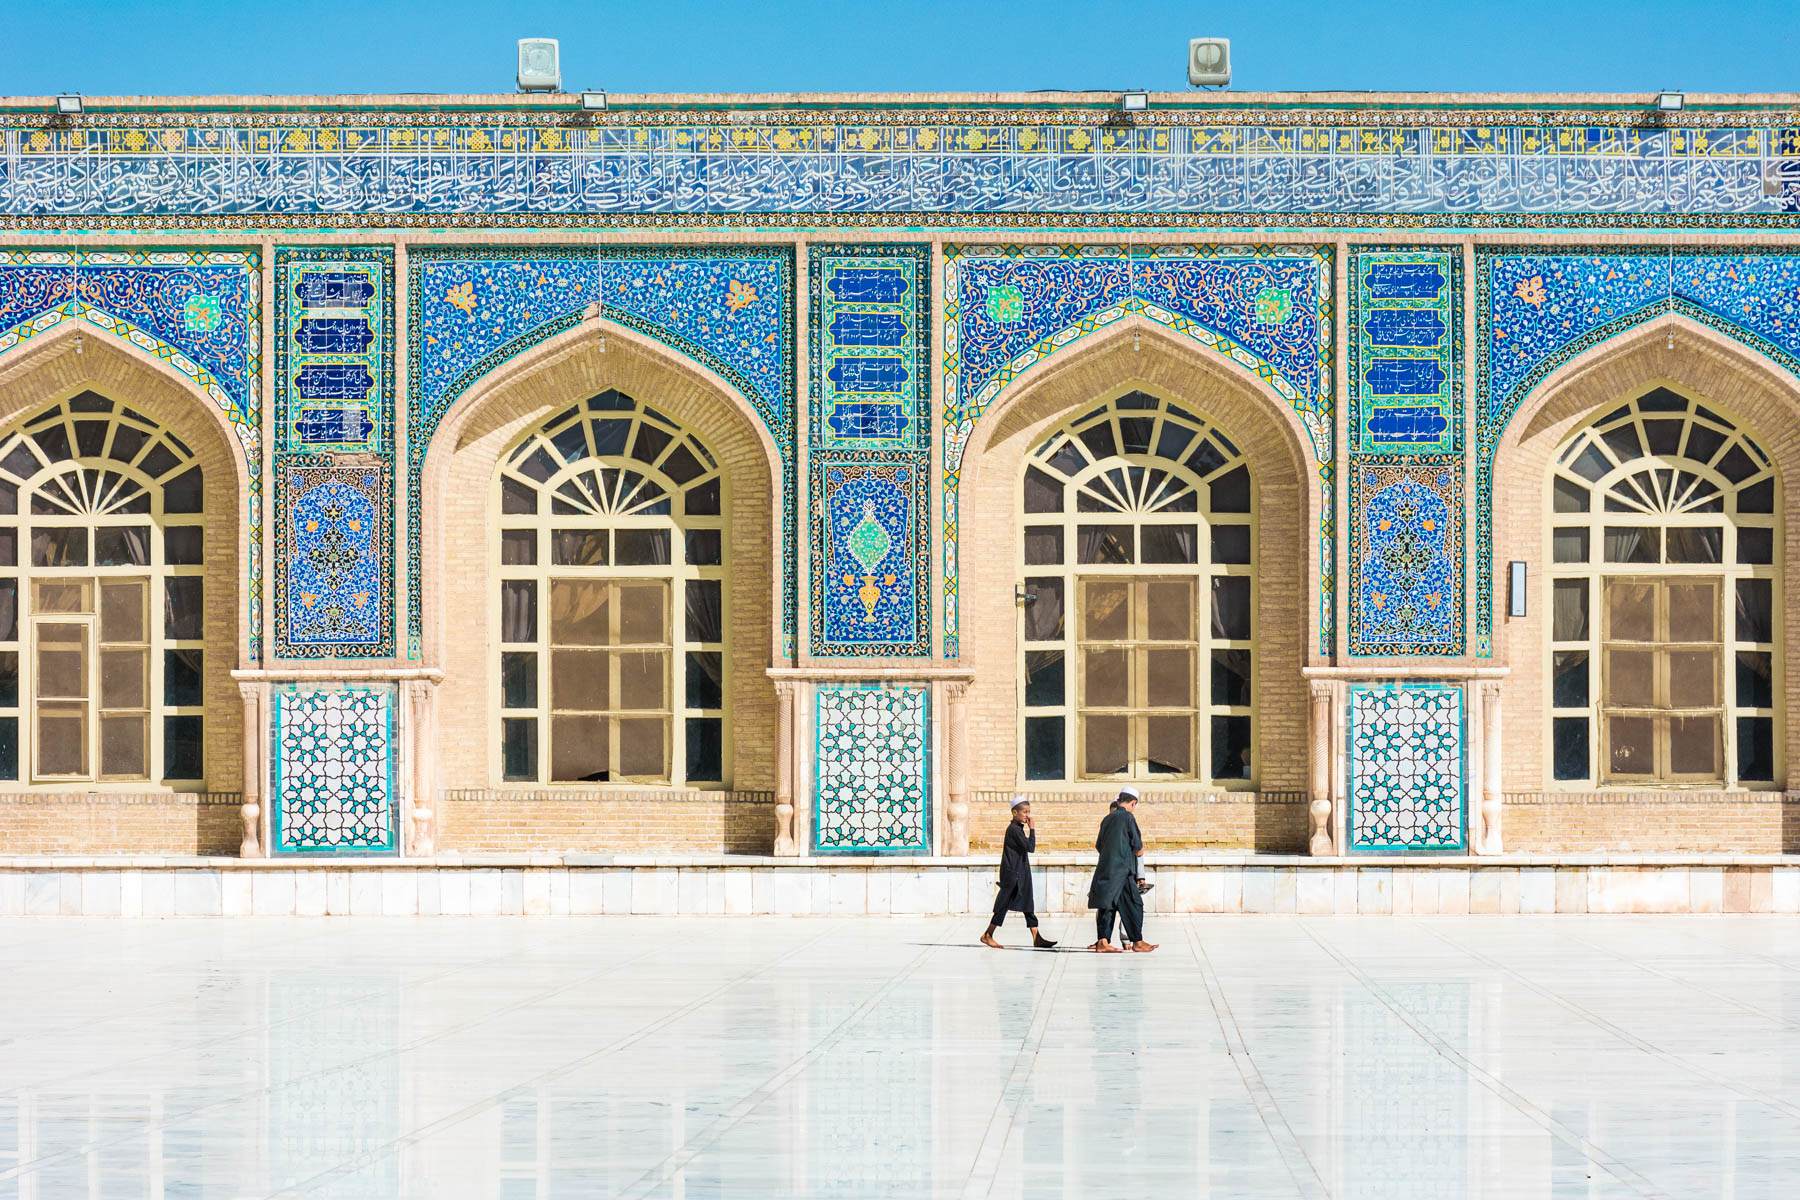 Boys walking in the Jame (Friday) Mosque in Herat, Afghanistan